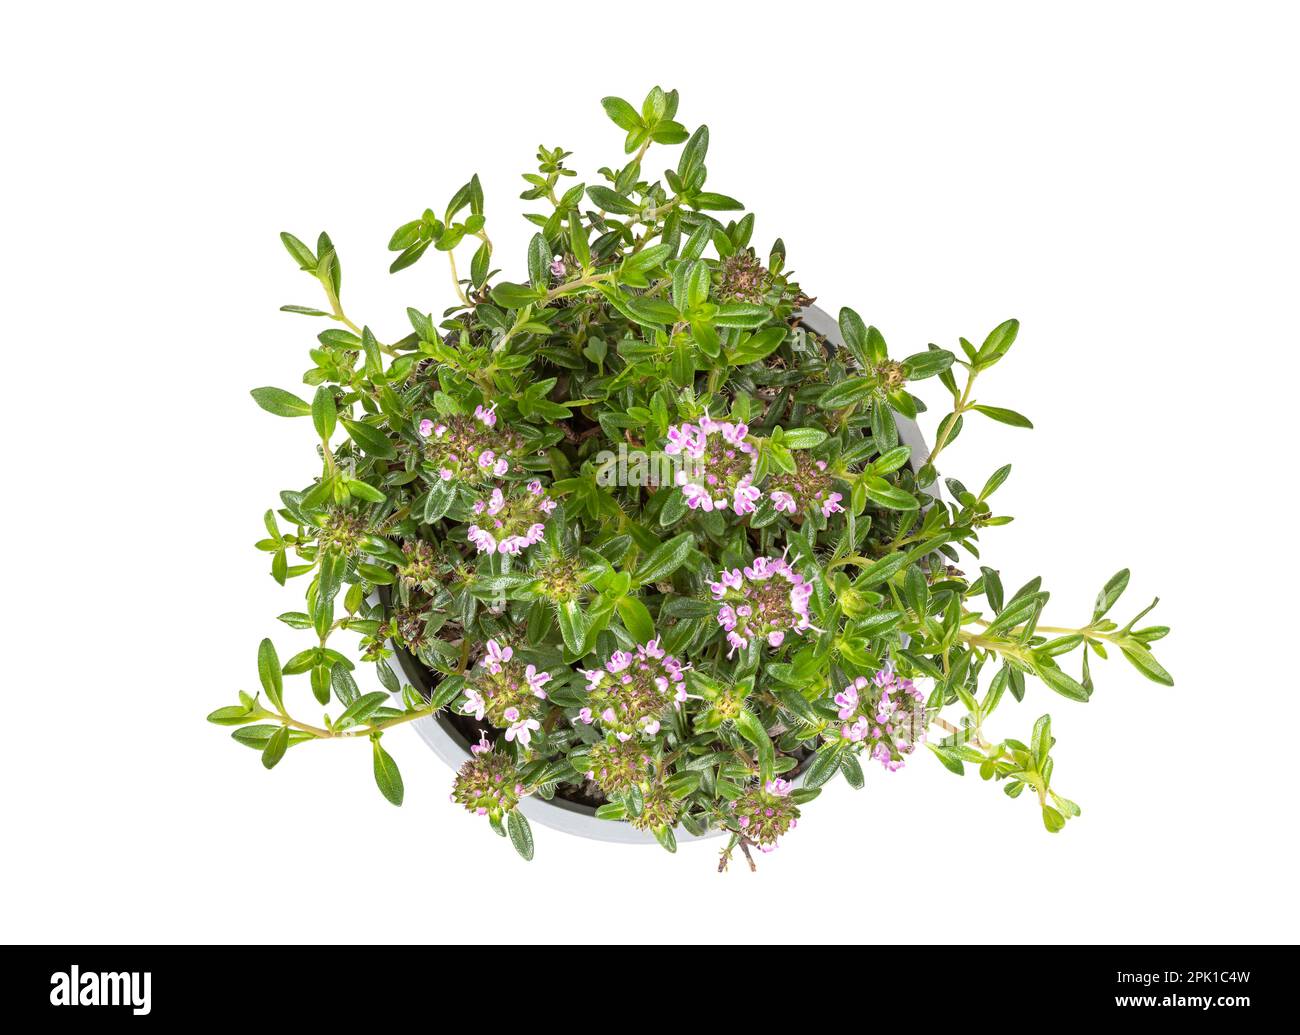 Winter savory, young plant in a gray plastic pot. Satureja montana, also known as mountain savory, with pale lavender flowers. Used as culinary herb. Stock Photo